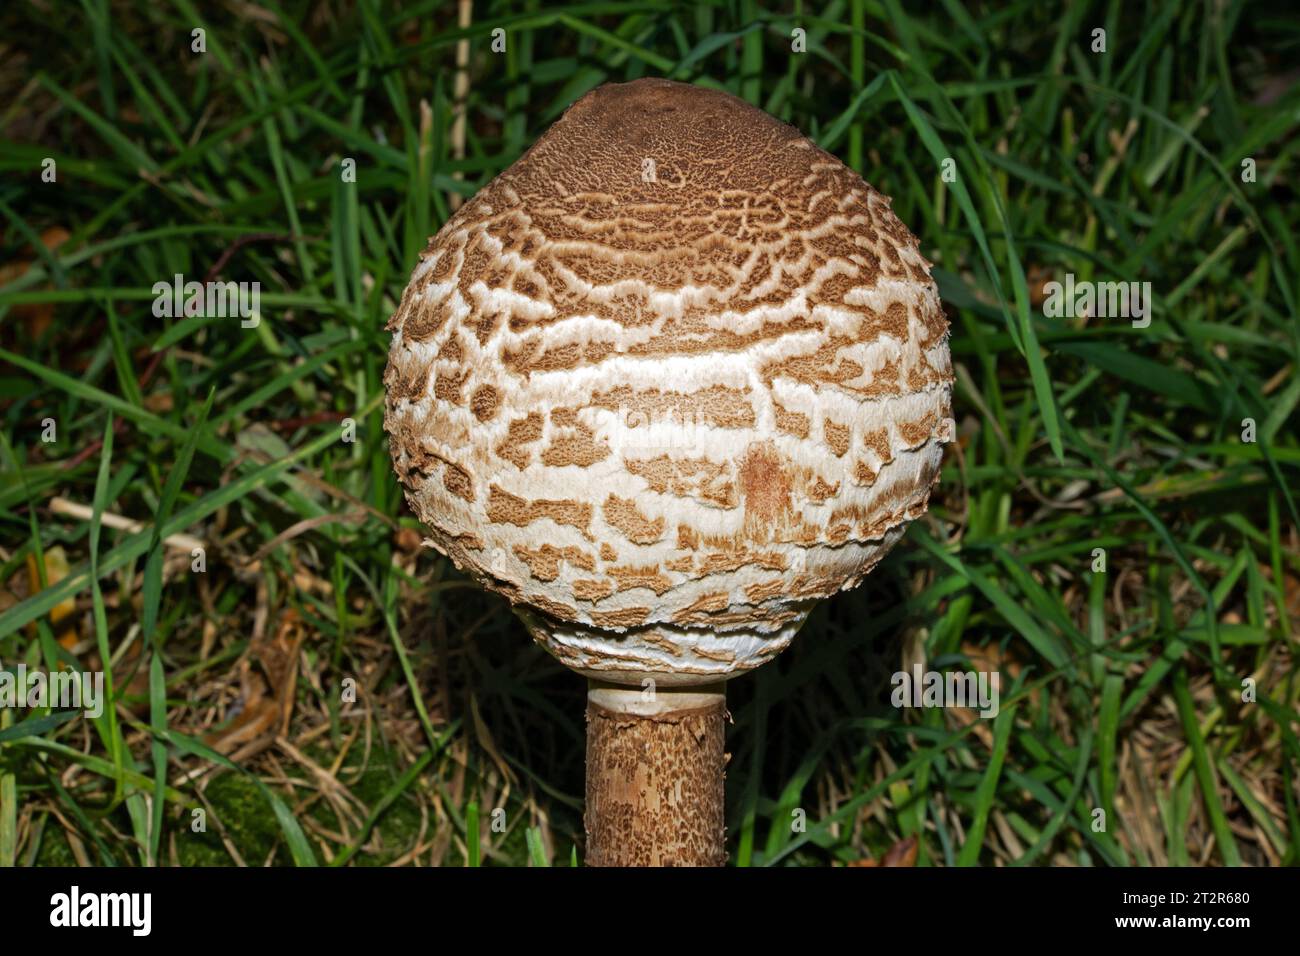 Macrolepiota procera (parasol mushroom) is a fungus found in pastures and occasionally in woodland. Globally, it is widespread in temperate regions. Stock Photo